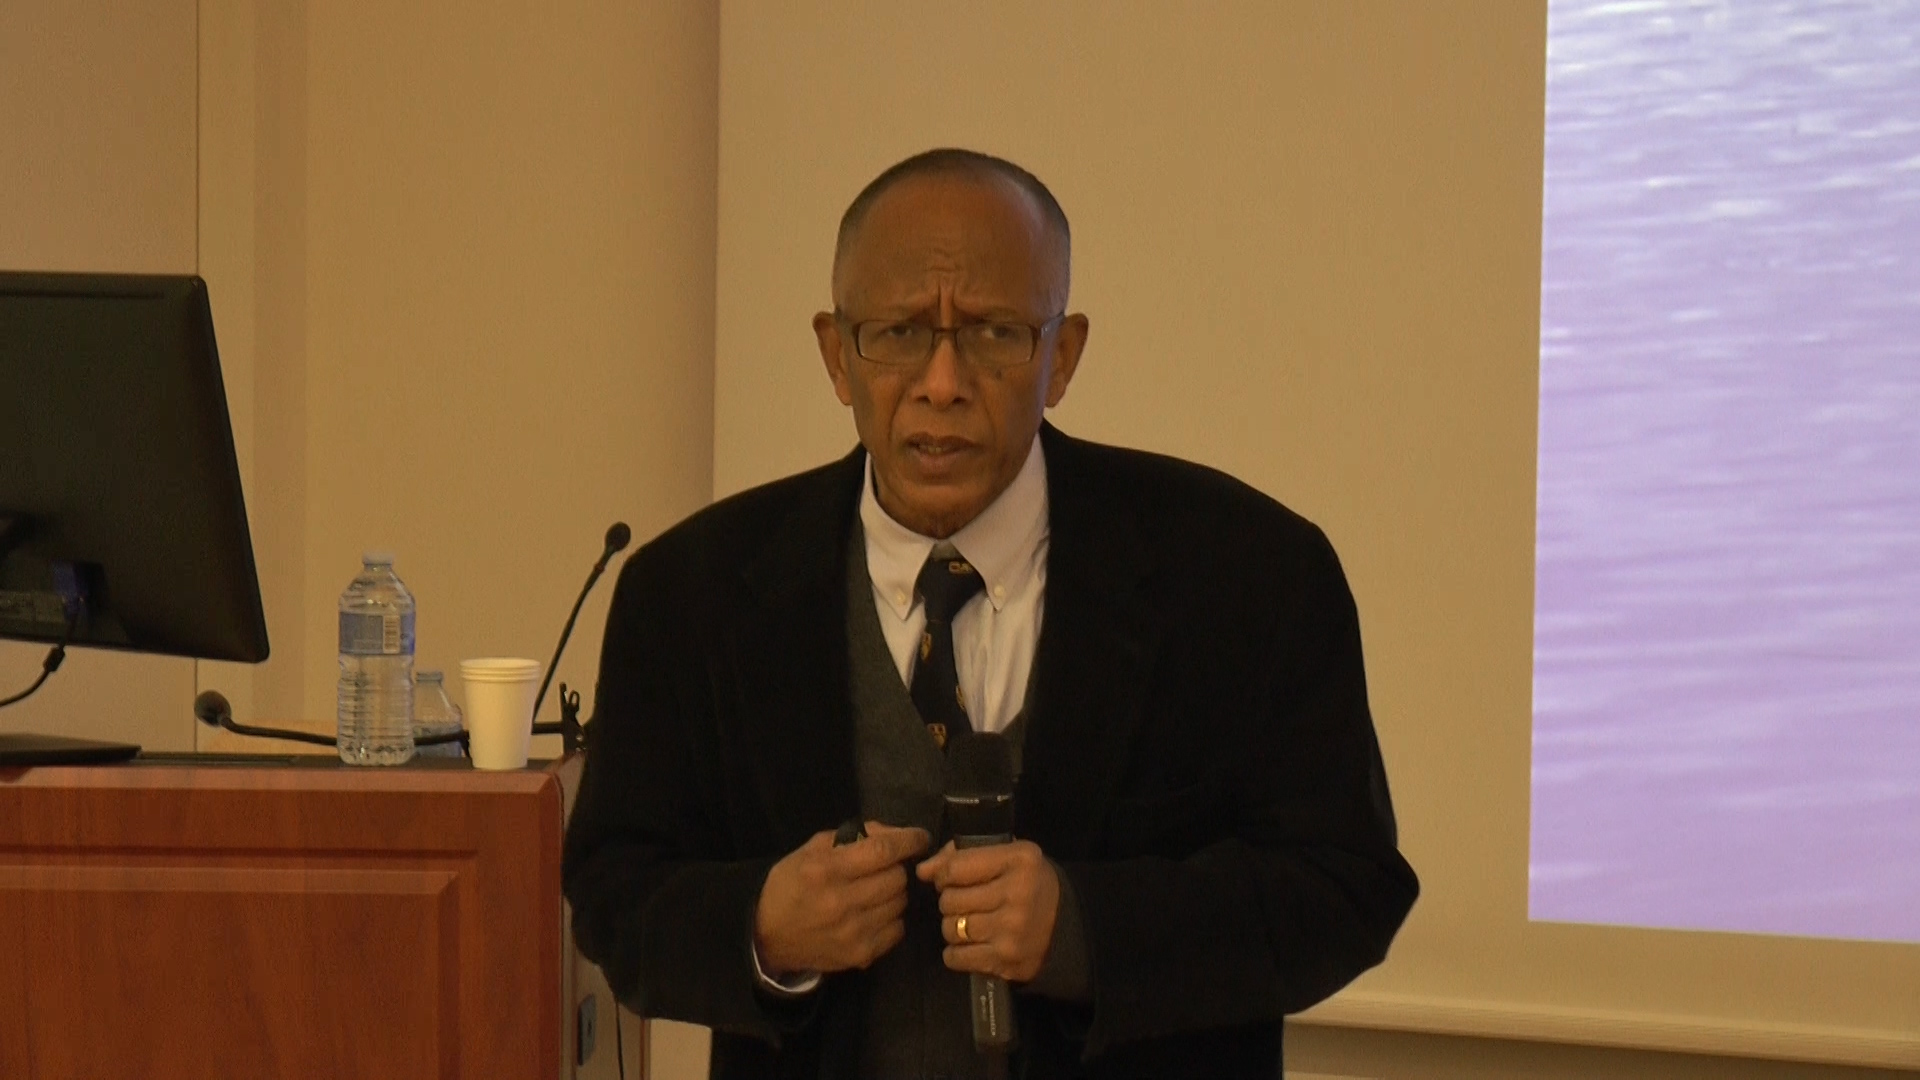 Orlando Patterson "Racial Issues and Integration in the USA"